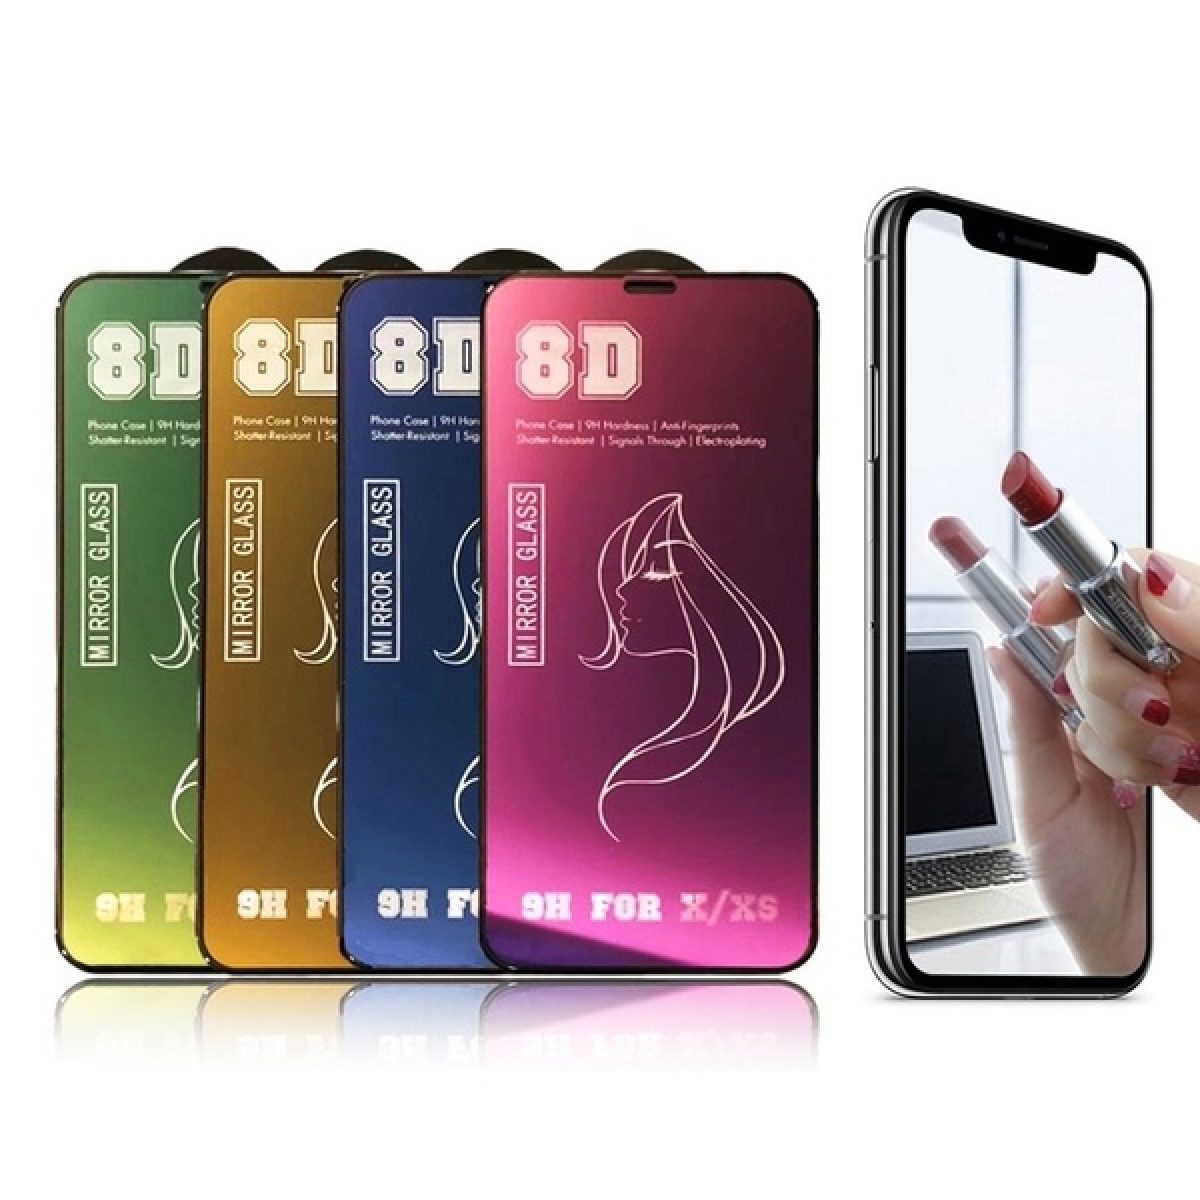 8D Colorful Mirror Tempered Glass